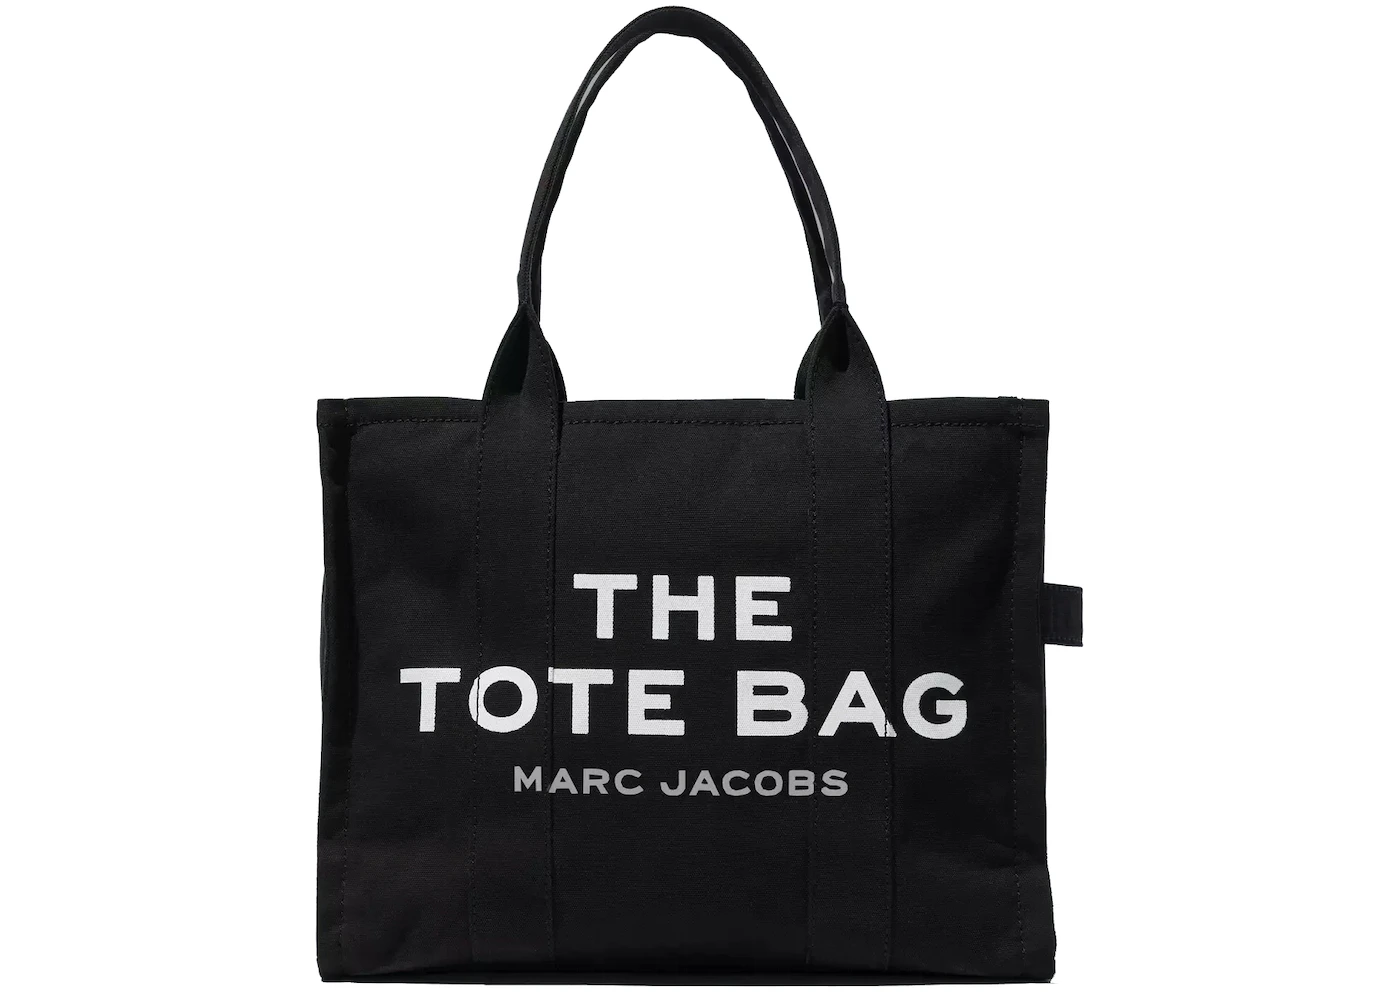 Marc Jacobs The Tote Bag Large Black